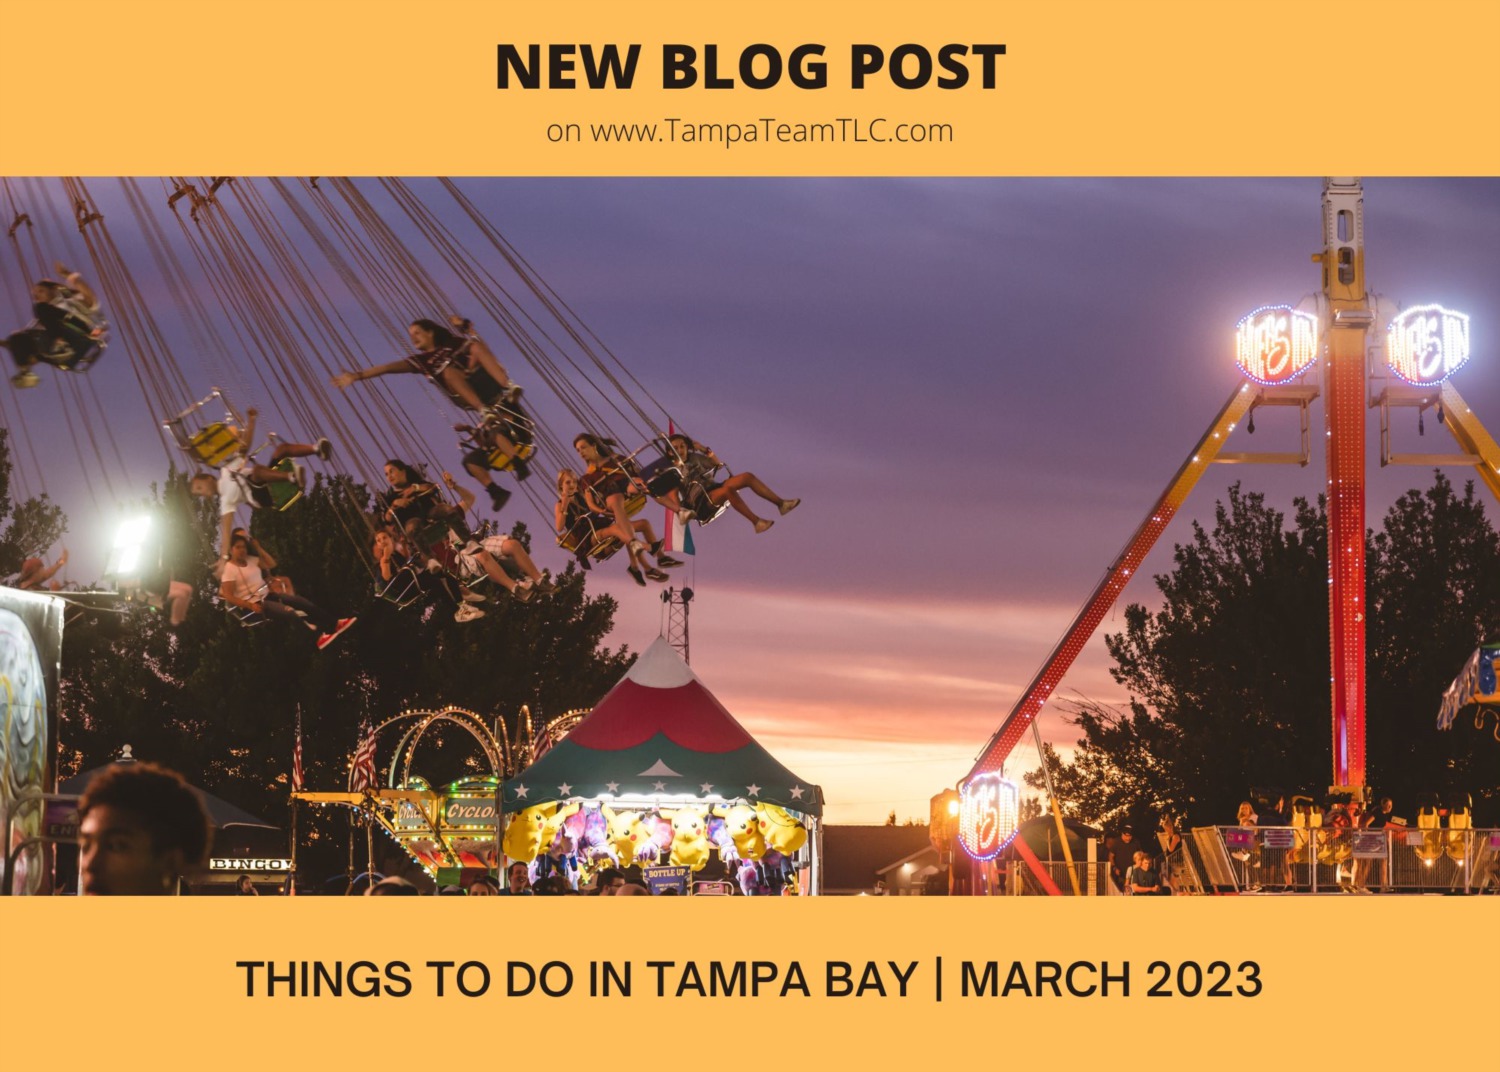 Things to do in Tampa Bay March 2023